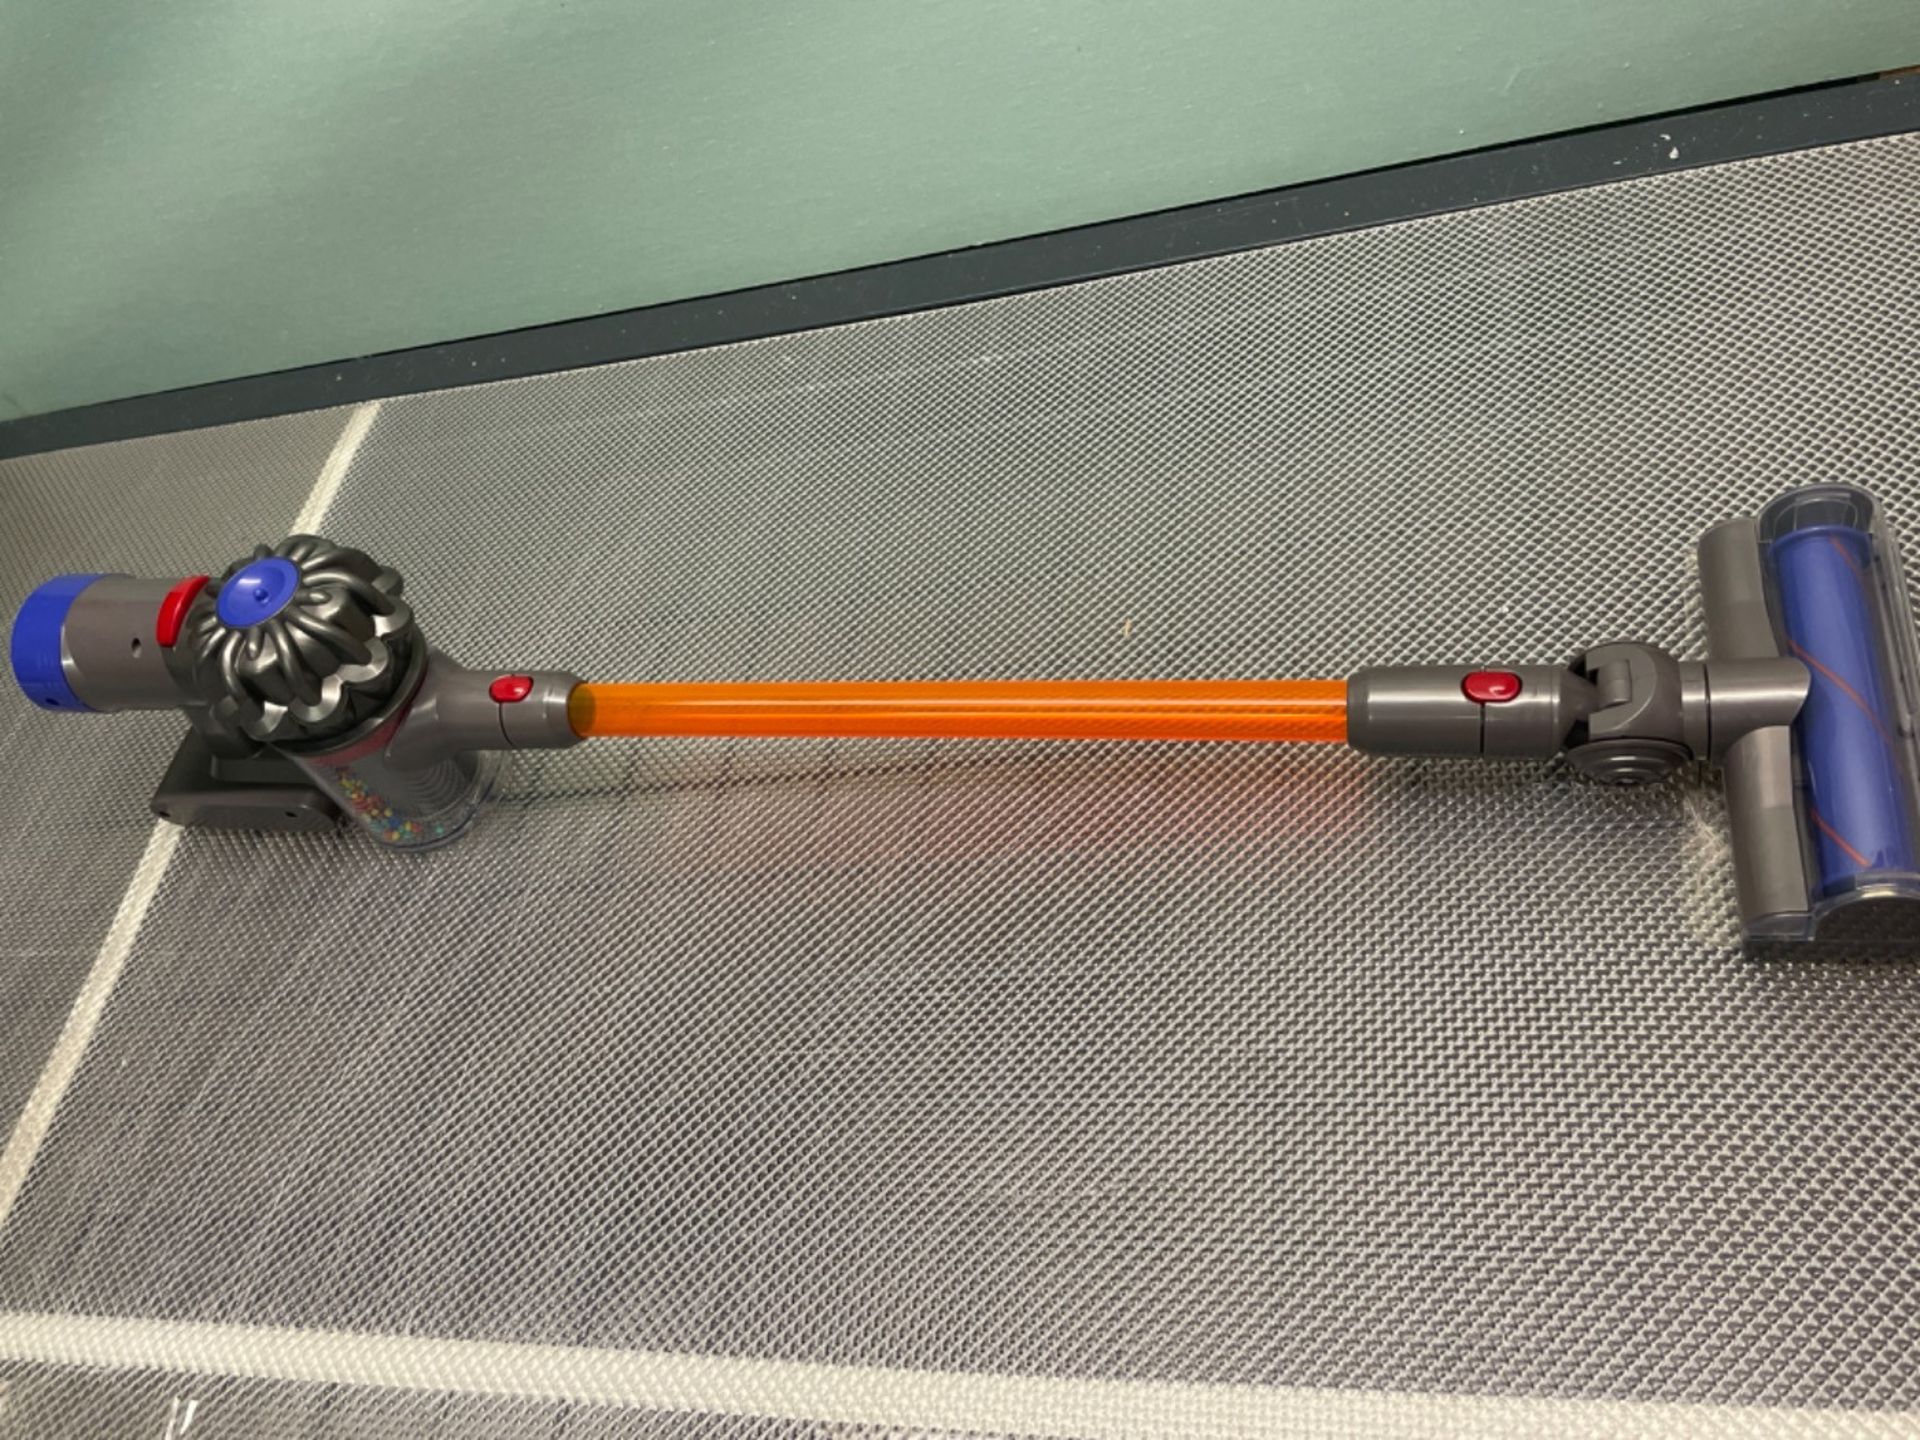 Casdon Dyson Toys. Cordless Vacuum Cleaner. Purple and Orange Interactive Toy Replica with Real Fun - Image 3 of 3